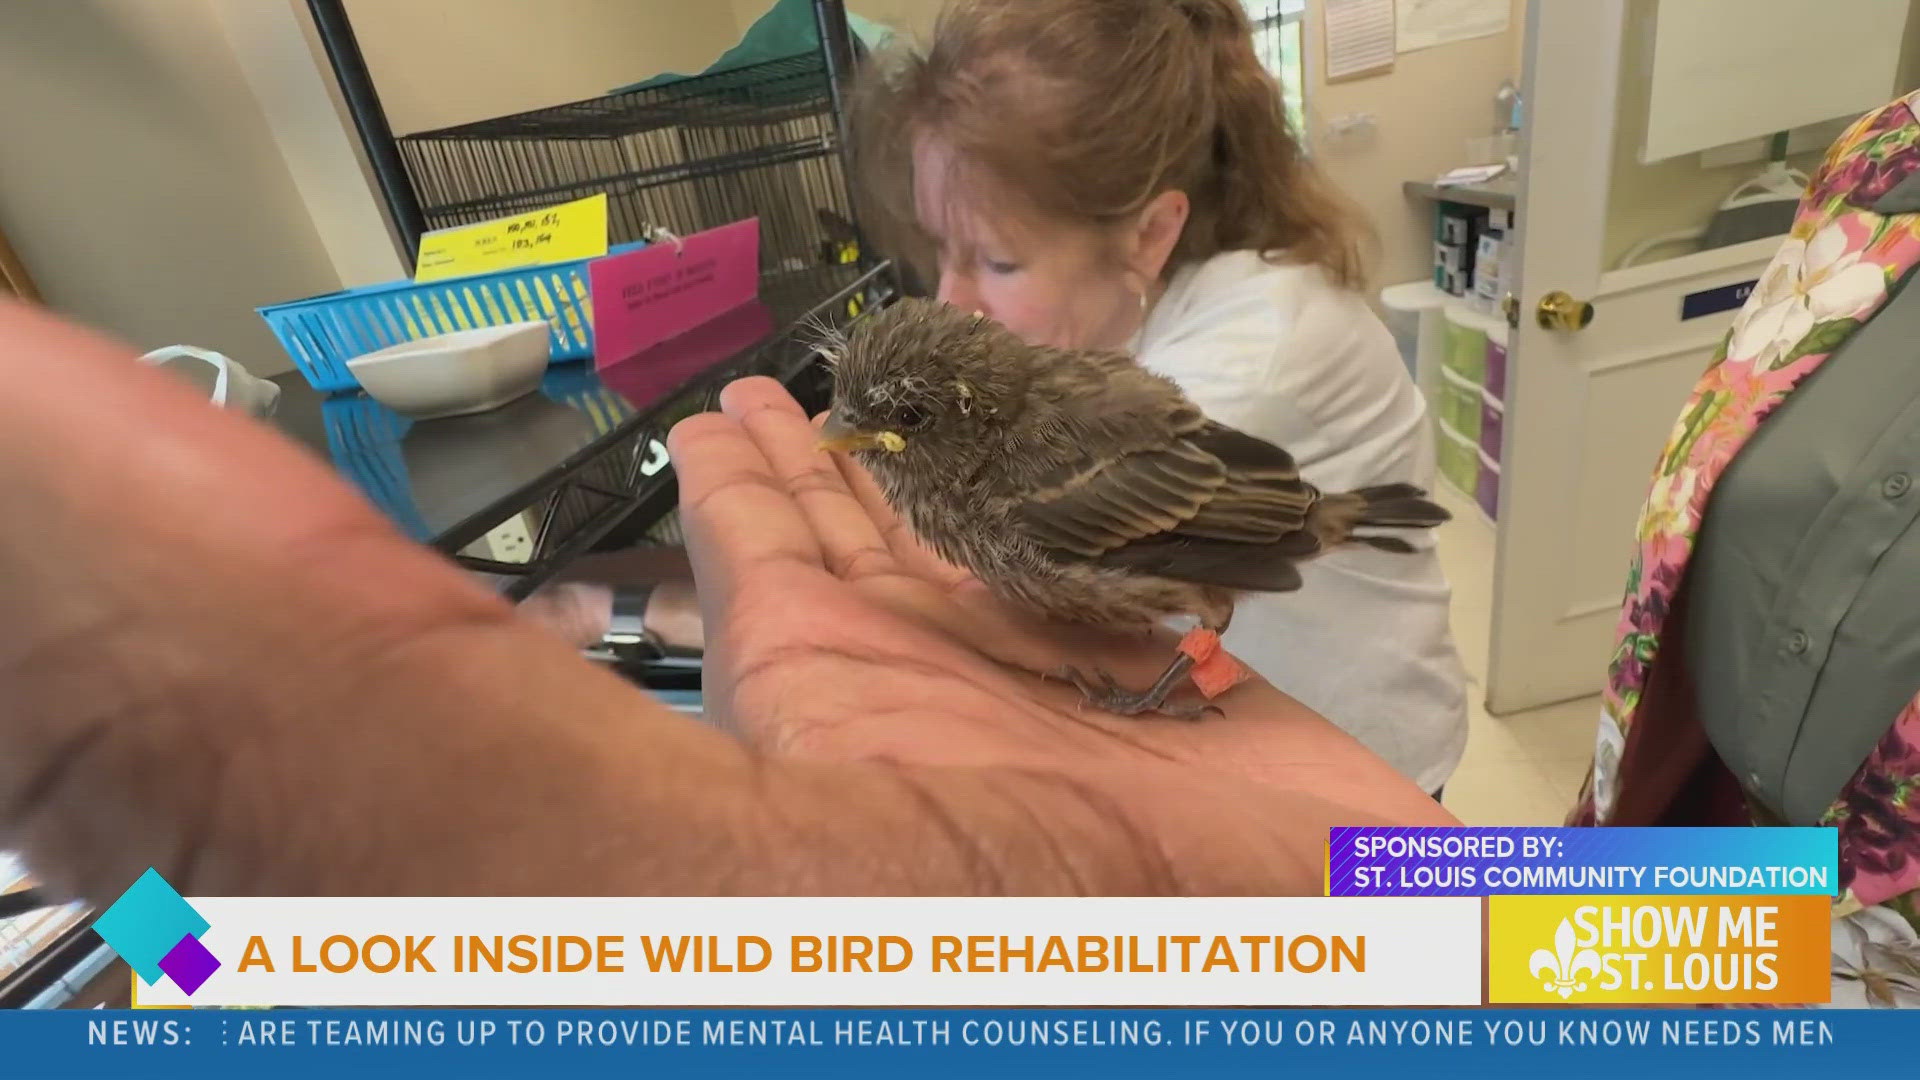 Wild Bird Rehabilitation is the only songbird hospital in Missouri dedicated to rehabilitation and release. Staff and volunteers help keep up operations.